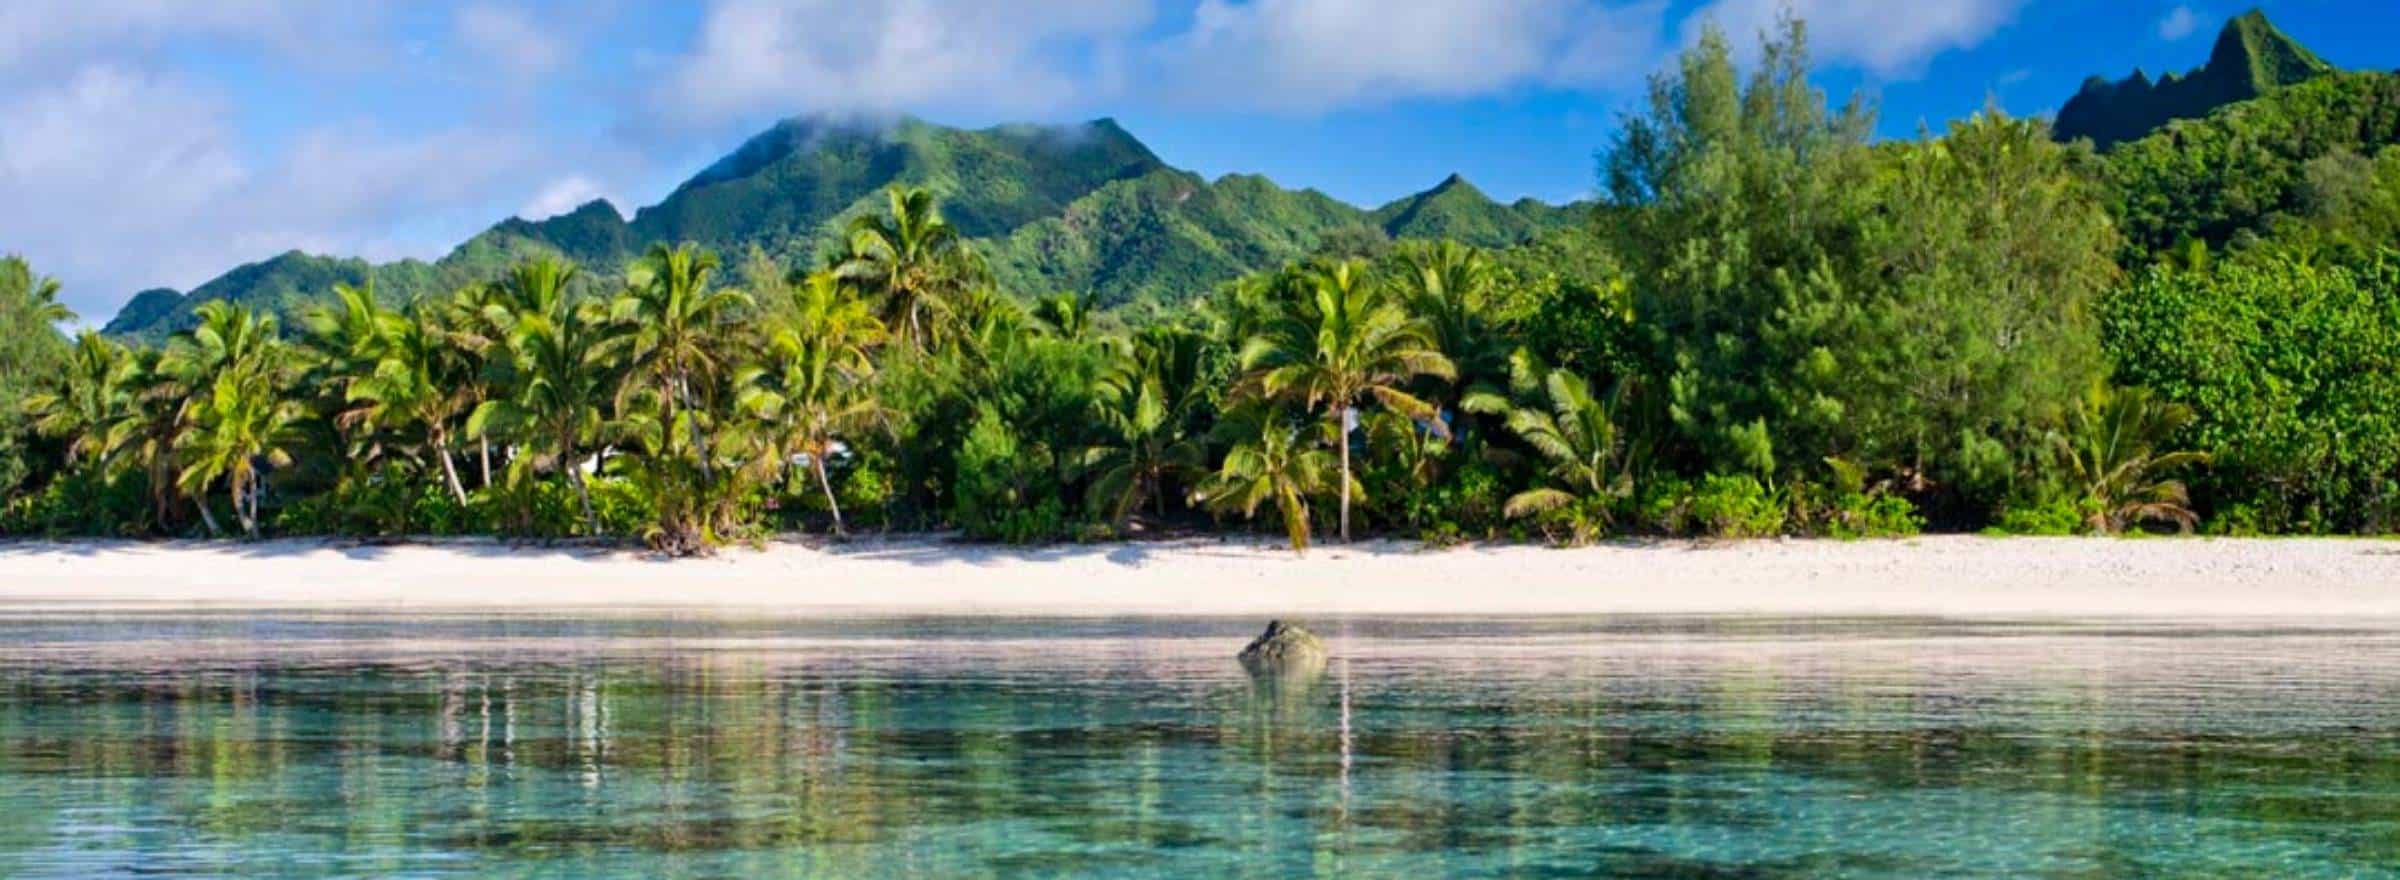 Travel Tips for the Cook Islands